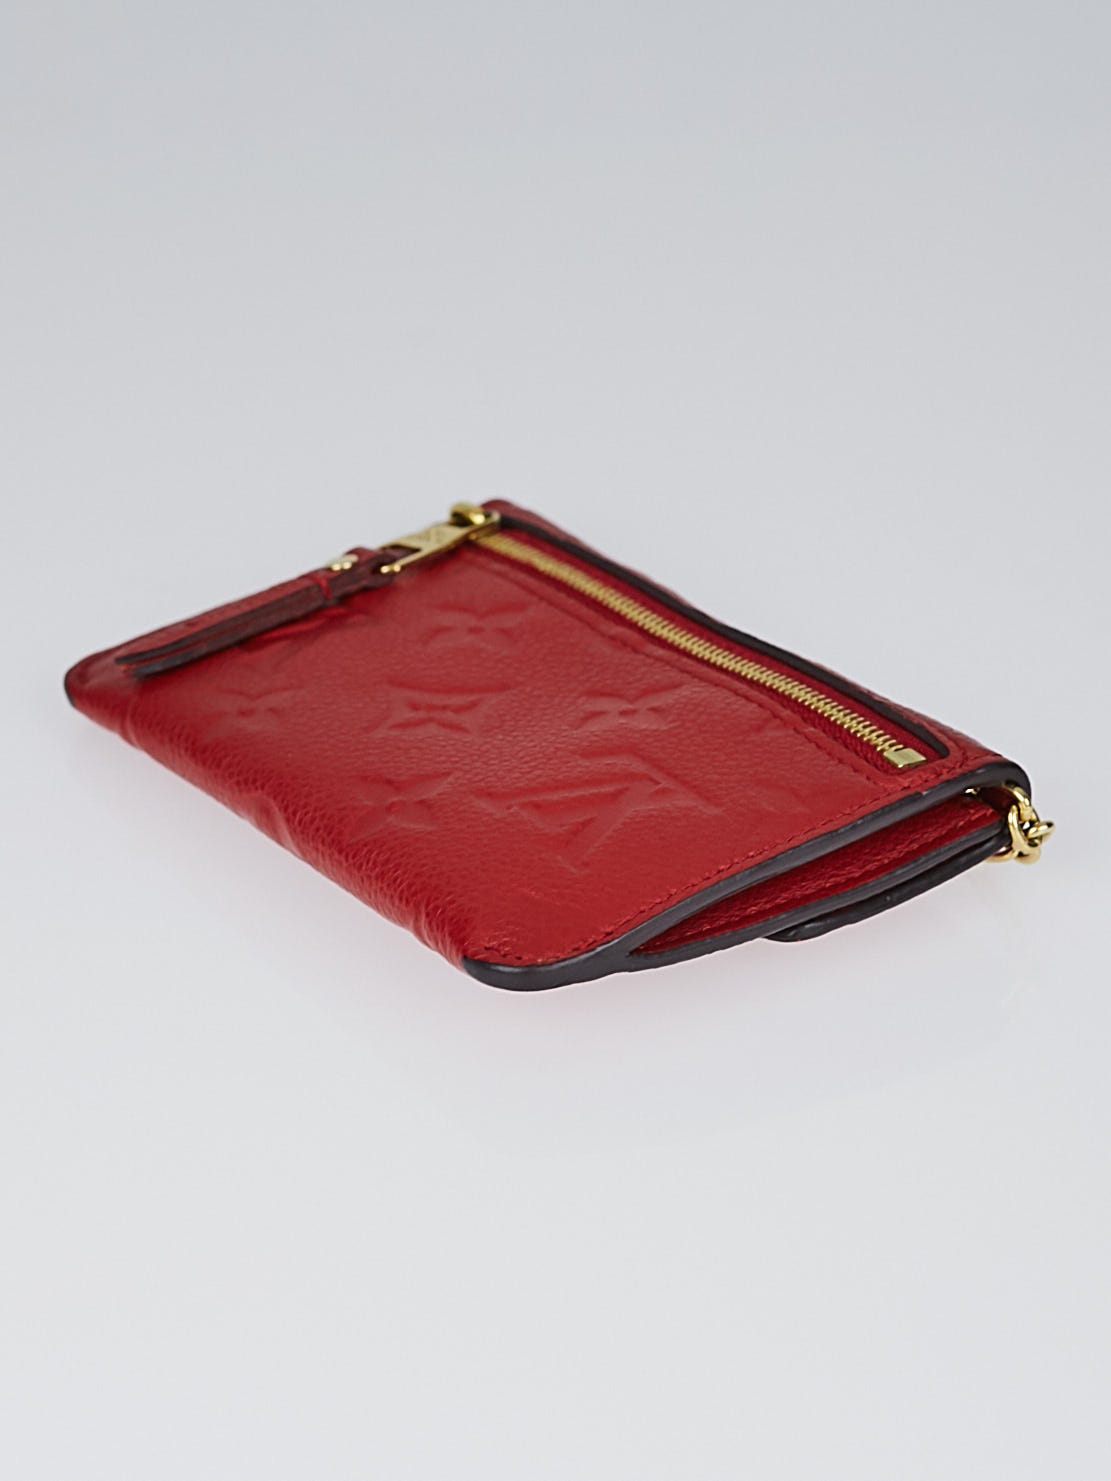 Louis Vuitton Cherry Red Empreinte Key Pouch with Box For Sale at